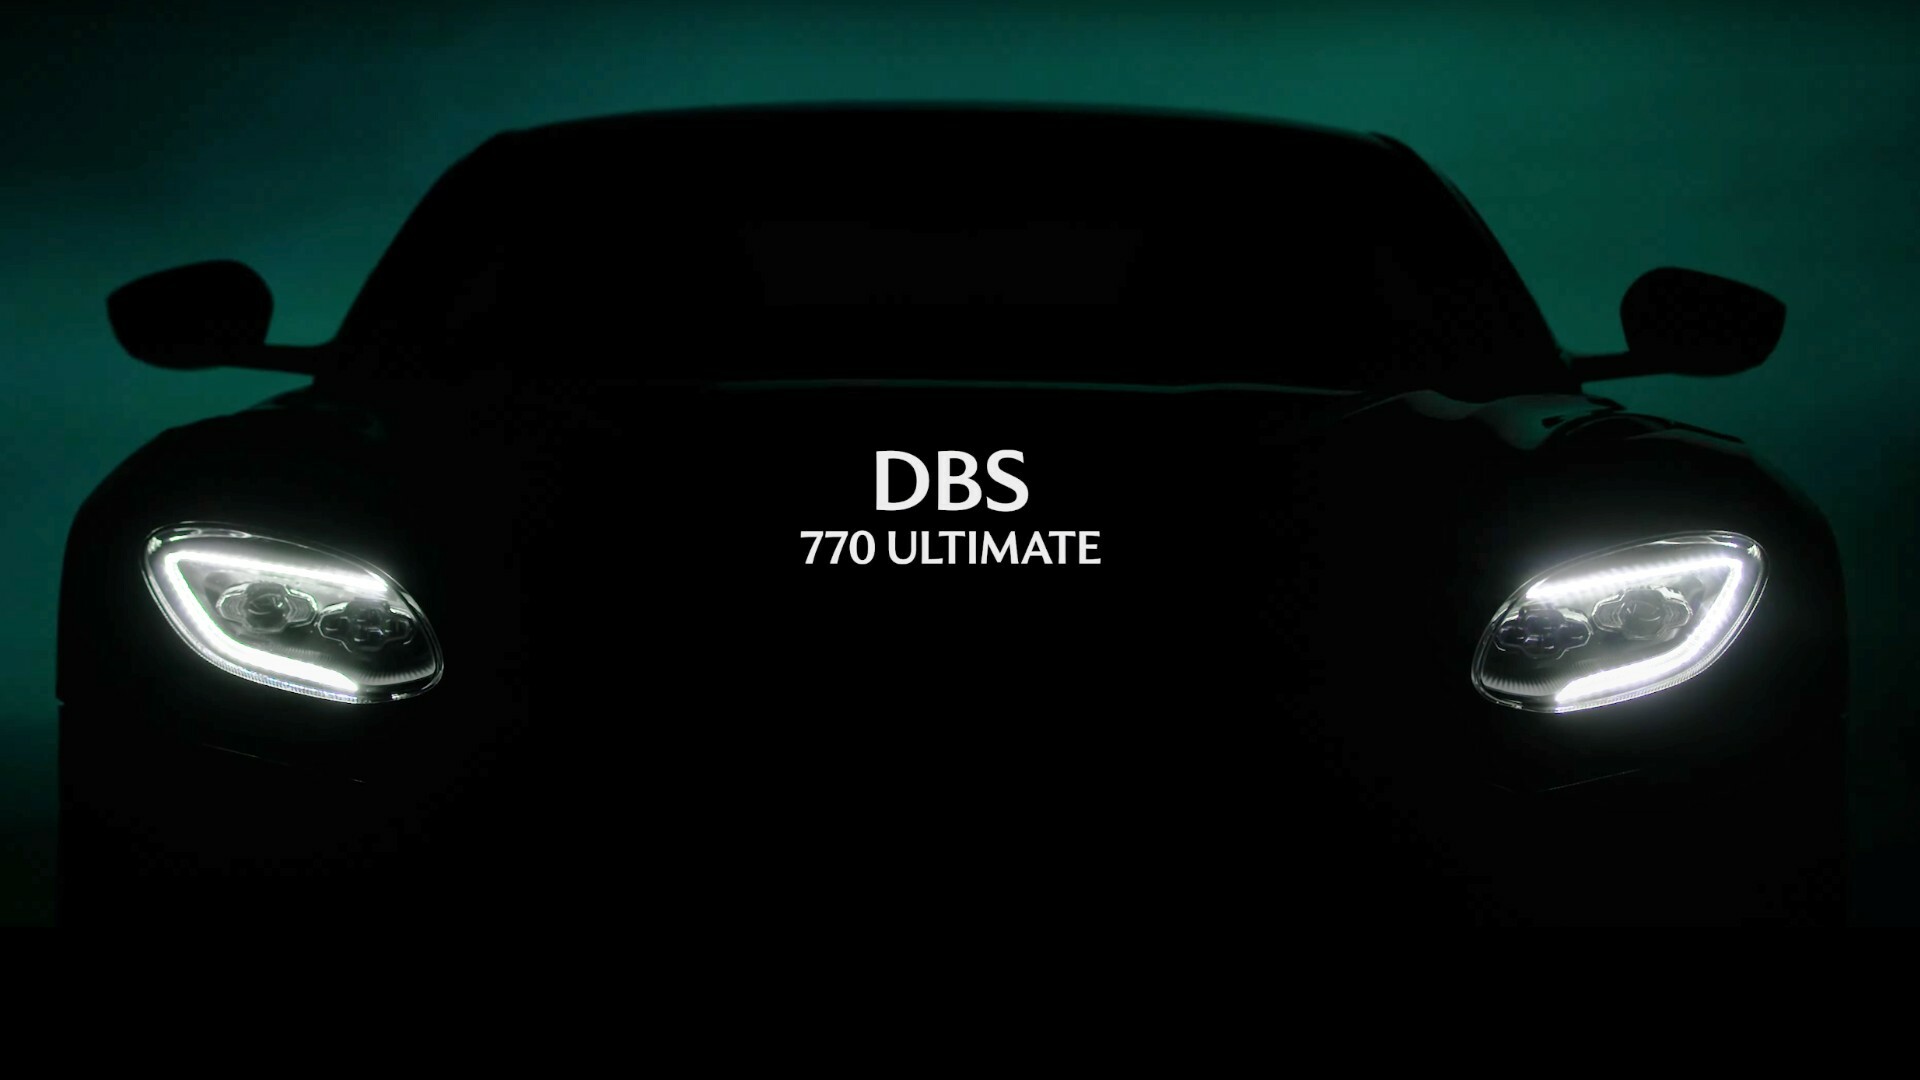 Aston Martin DBS 770 Final Teased As A Restricted Manufacturing Swan Tune